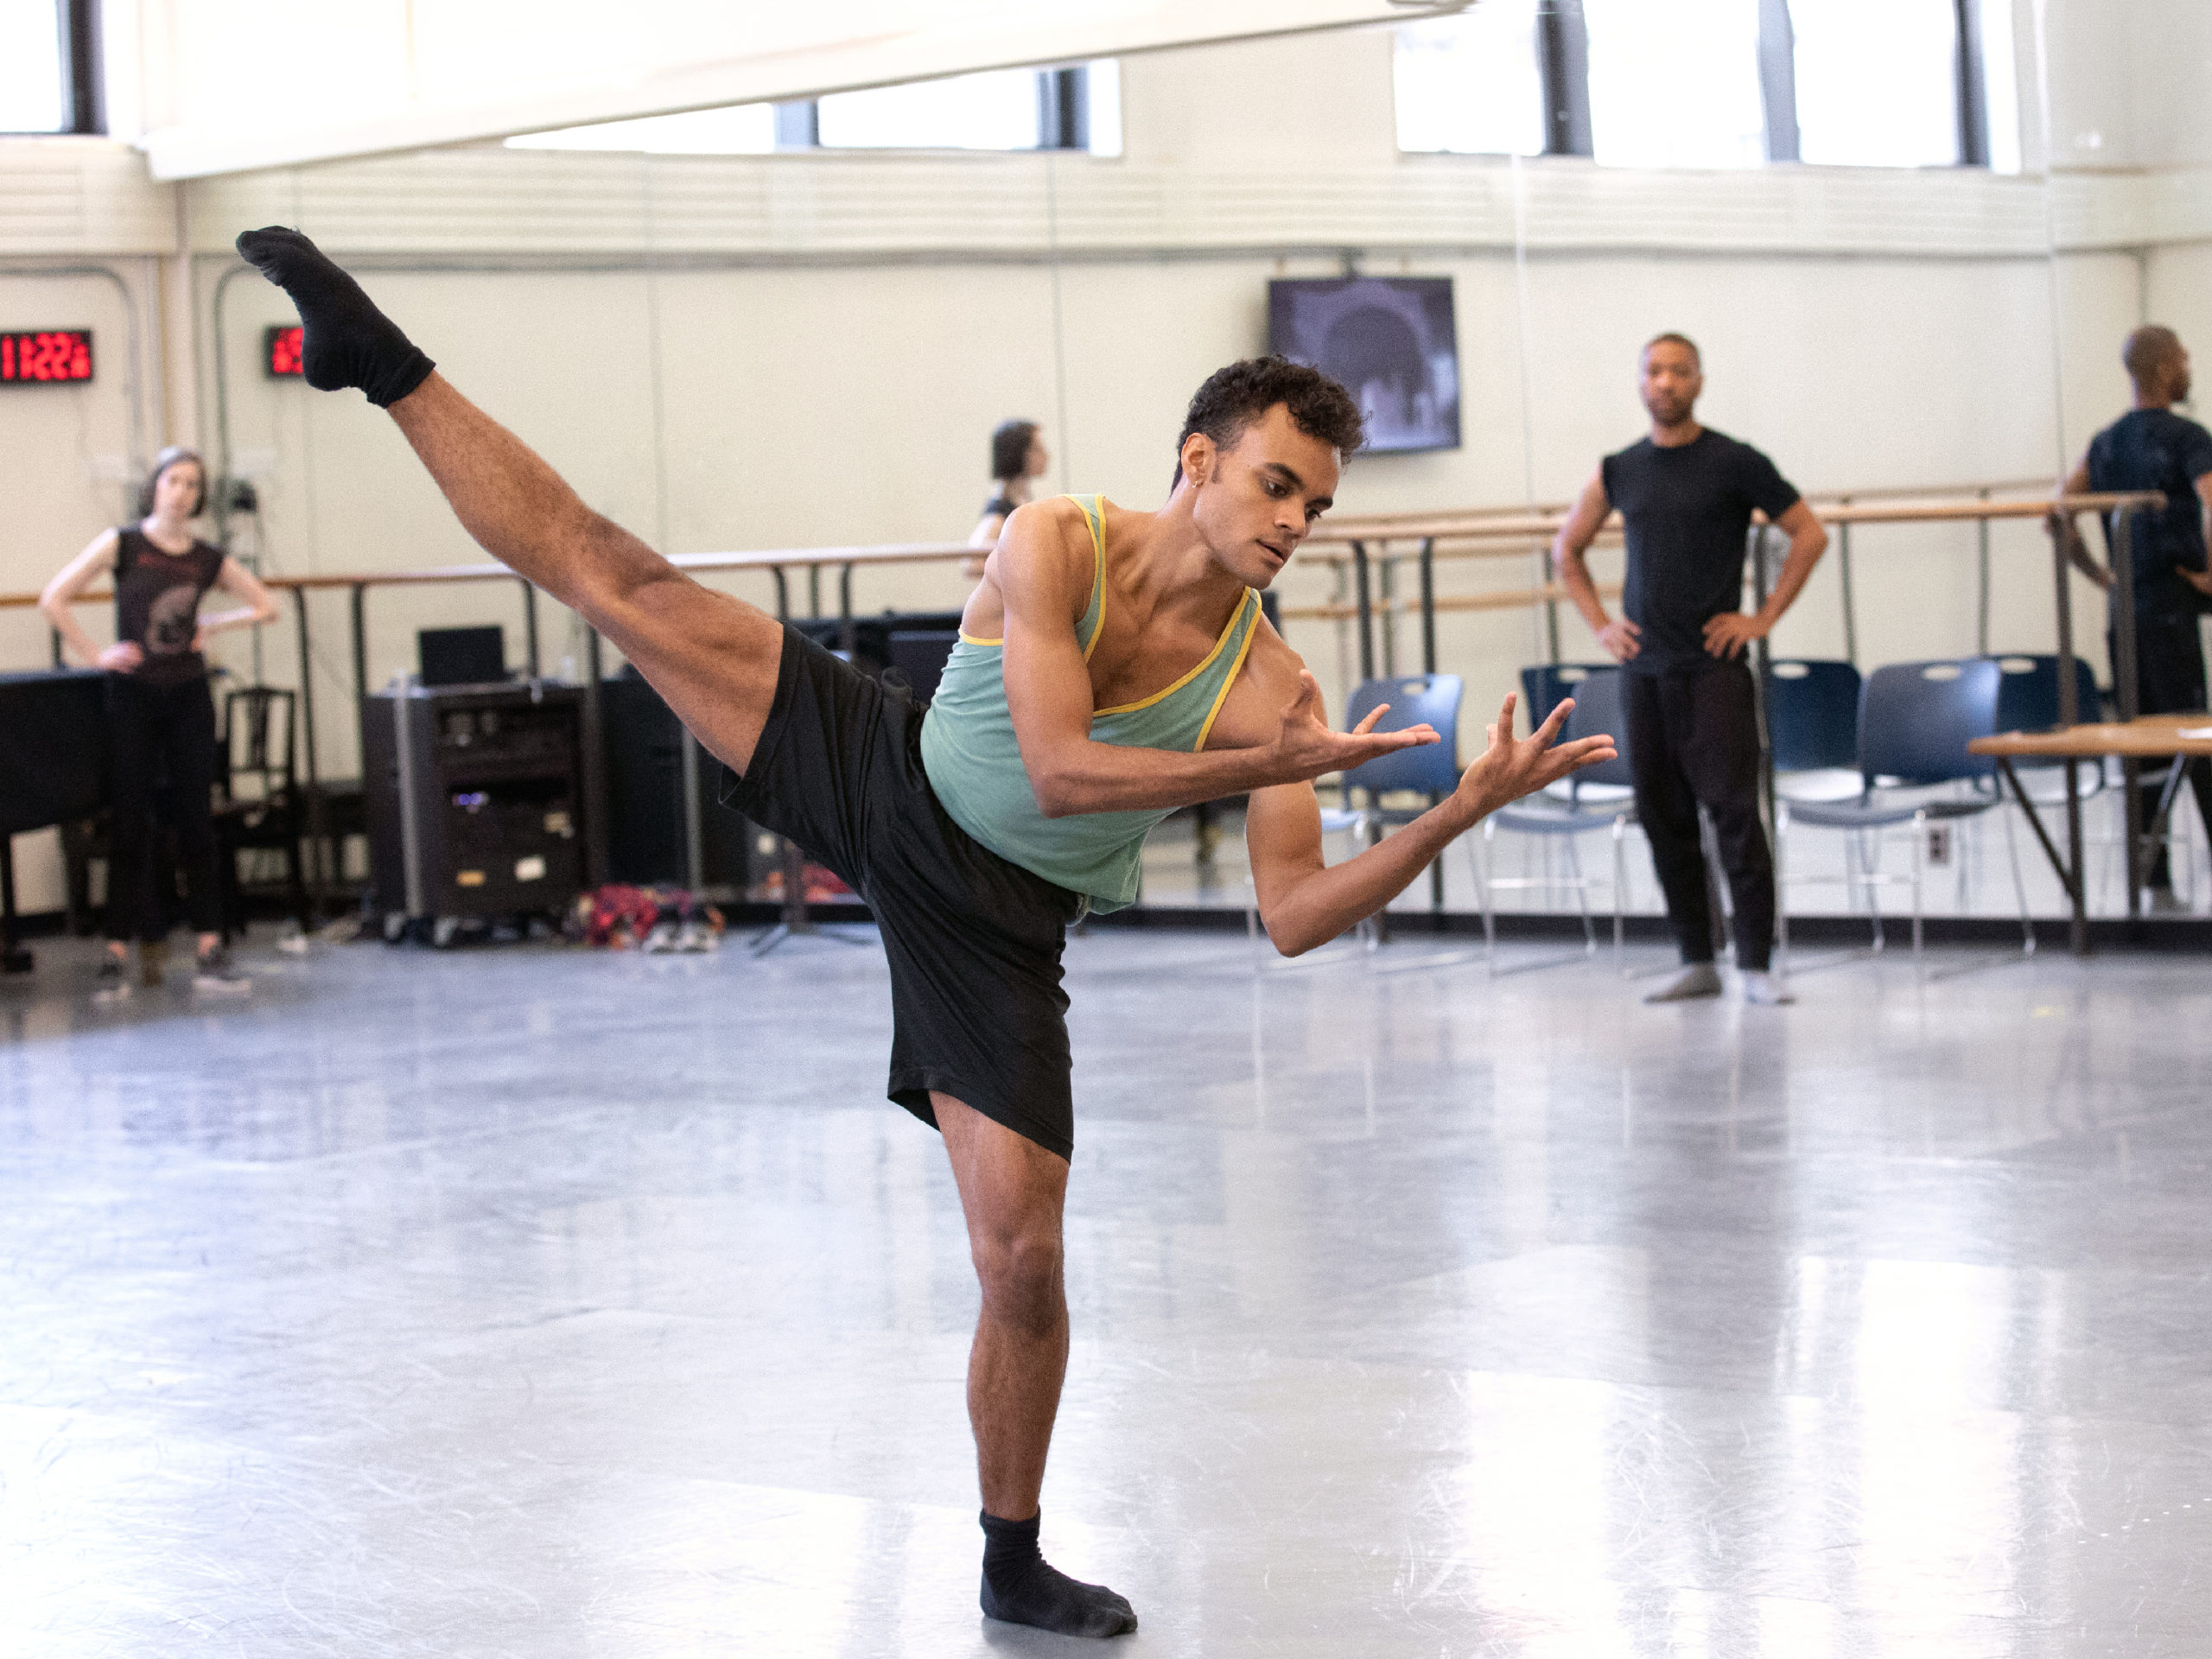 Taylor Stanley balances in plié, his working leg extended above ninety degrees to the side. His torso leans toward his standing leg, slightly contracting as he gazes towards his upturned palms, splayed toward his face, elbows bent towards his chest. He wears a tank top, gym shorts, and socks. Kyle Abraham stands at the front of the rehearsal studio, hands on his hips as he watches.